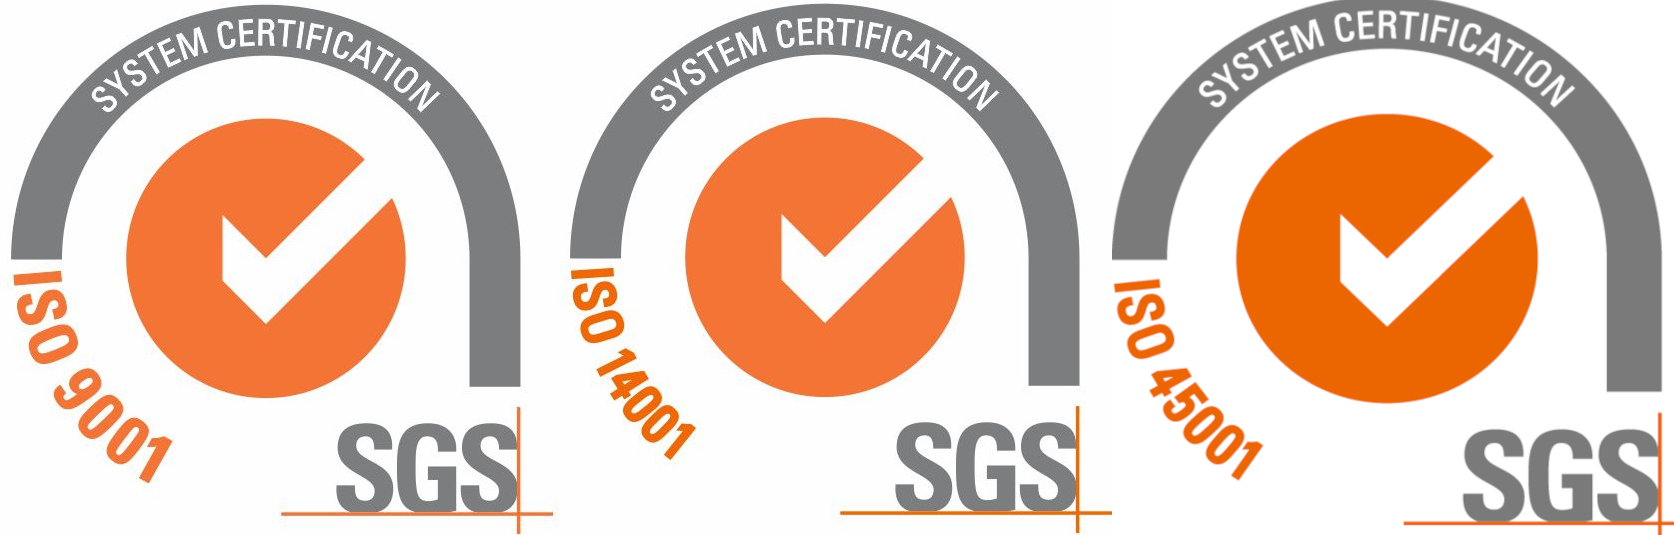 System Certifications